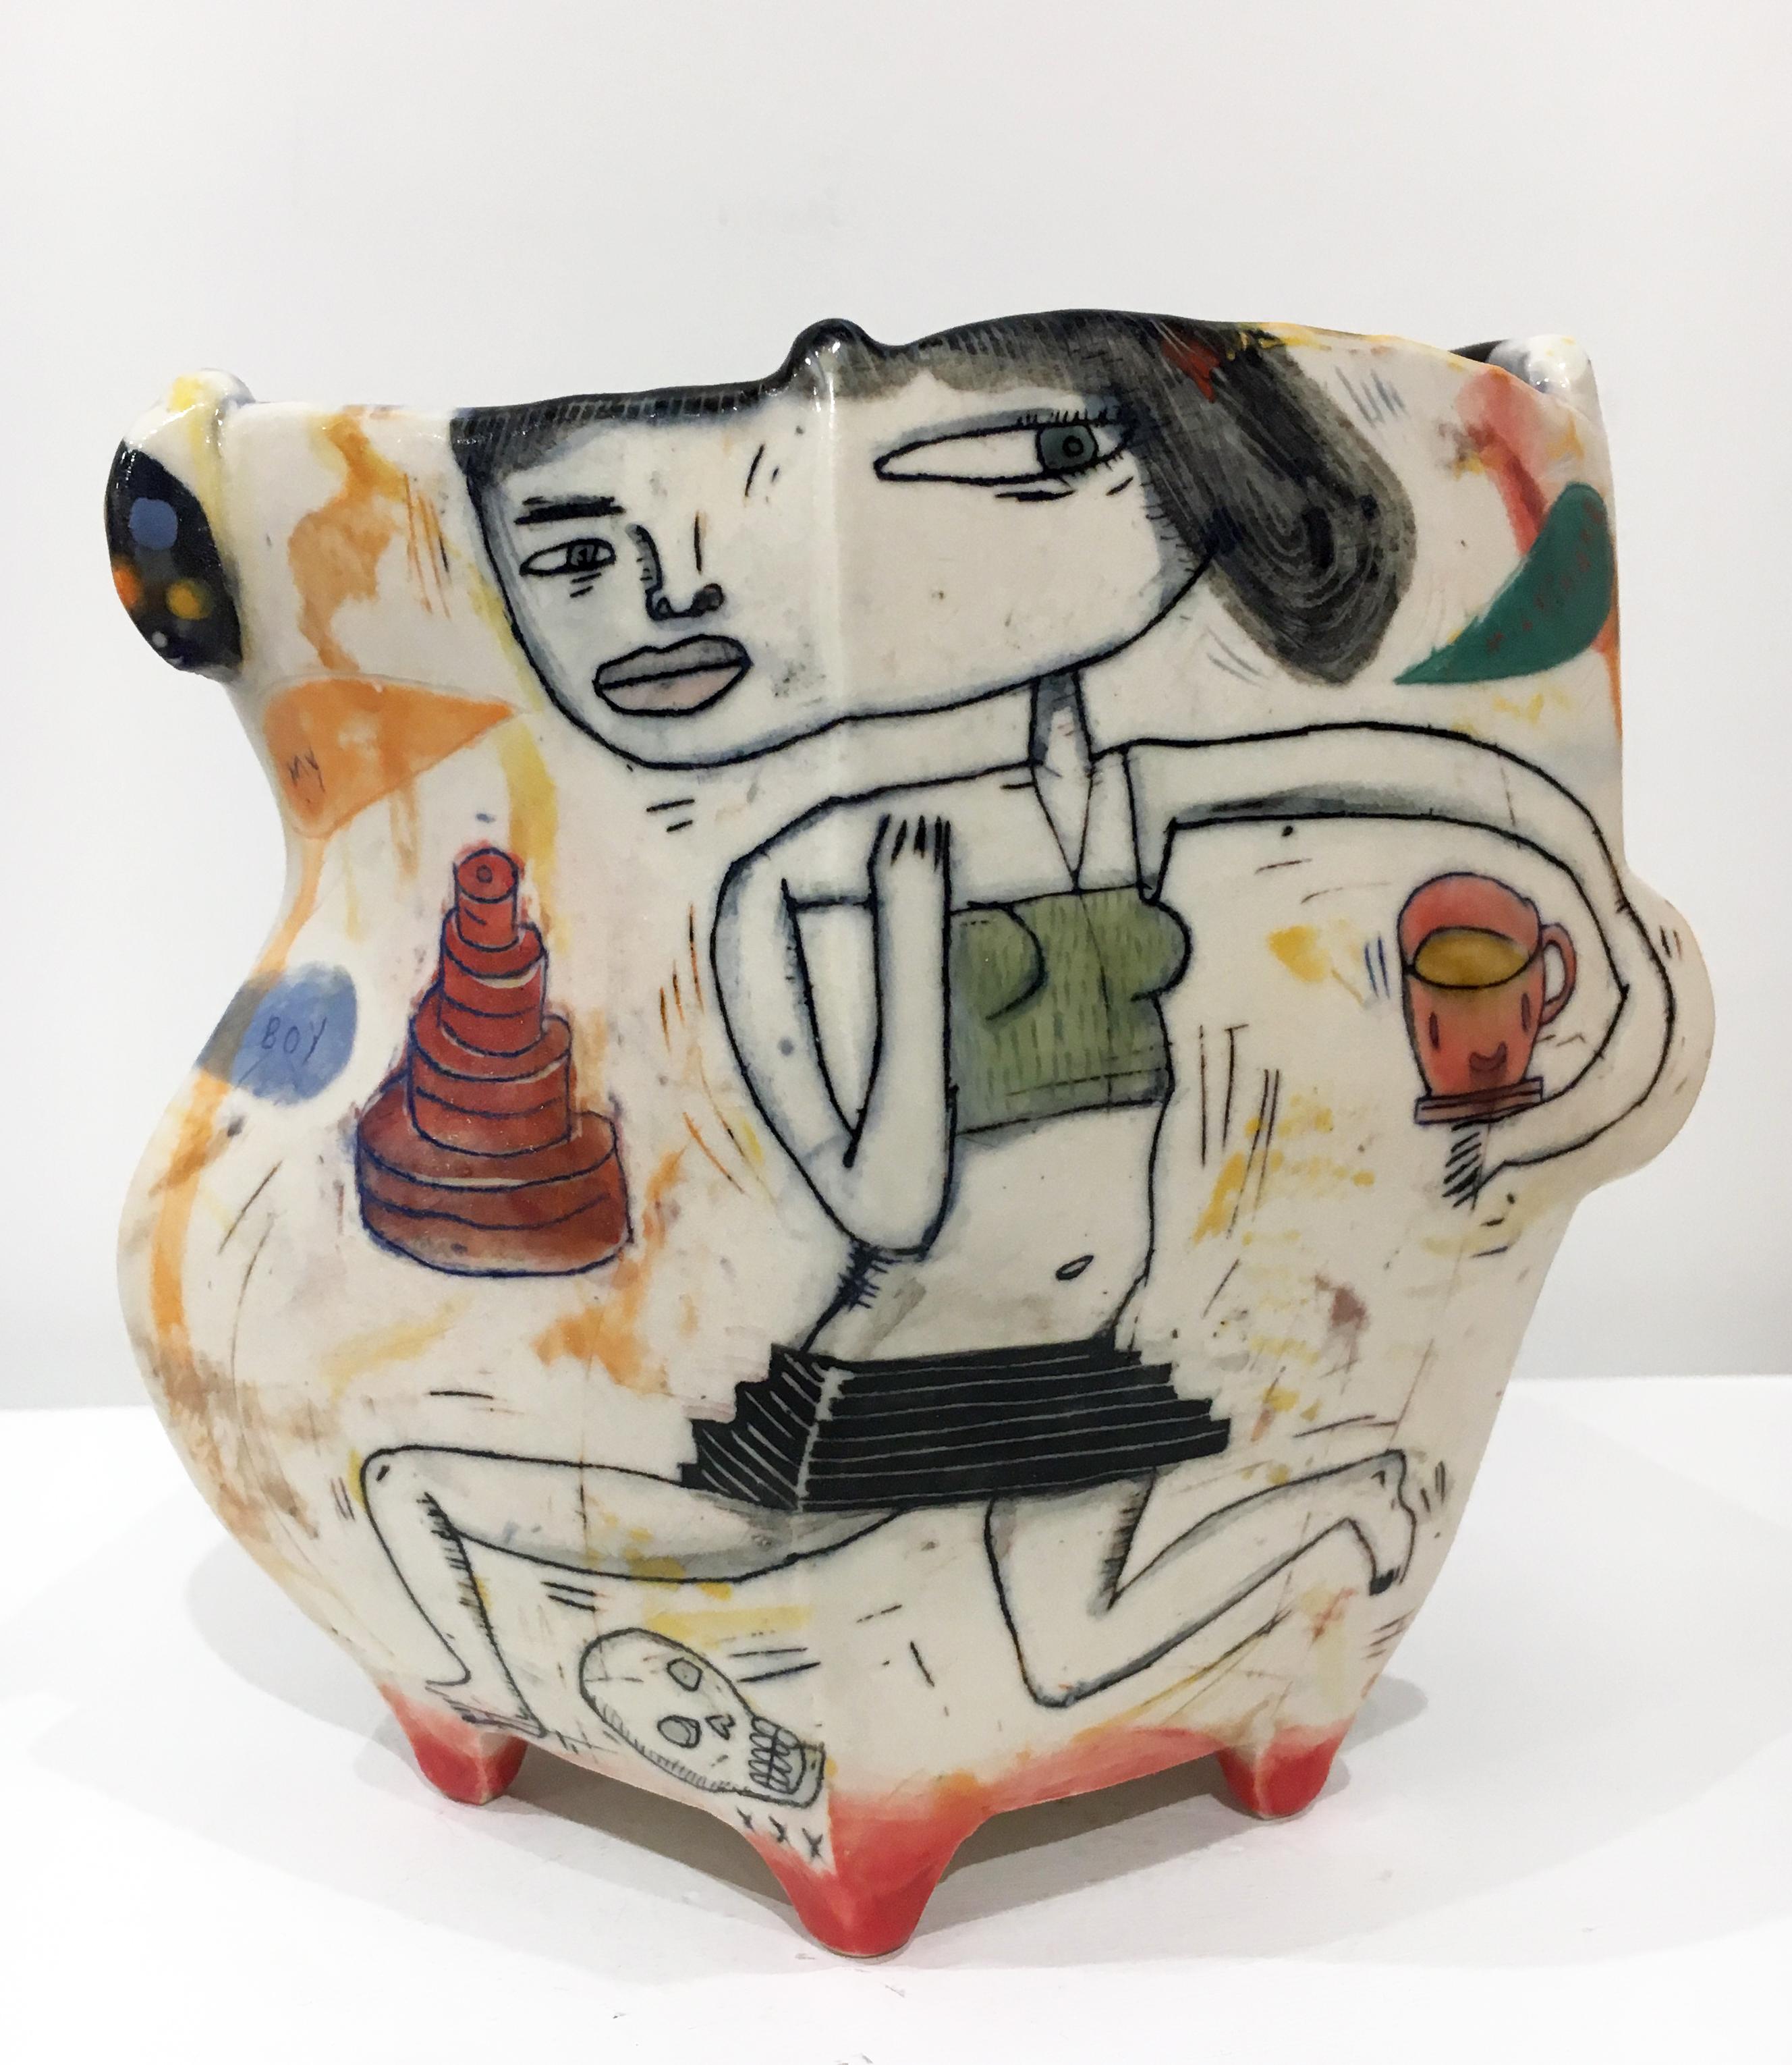 Kevin Snipes Abstract Sculpture - "Piece of Cake", Abstract Porcelain Sculpture with Illustration and Underglaze